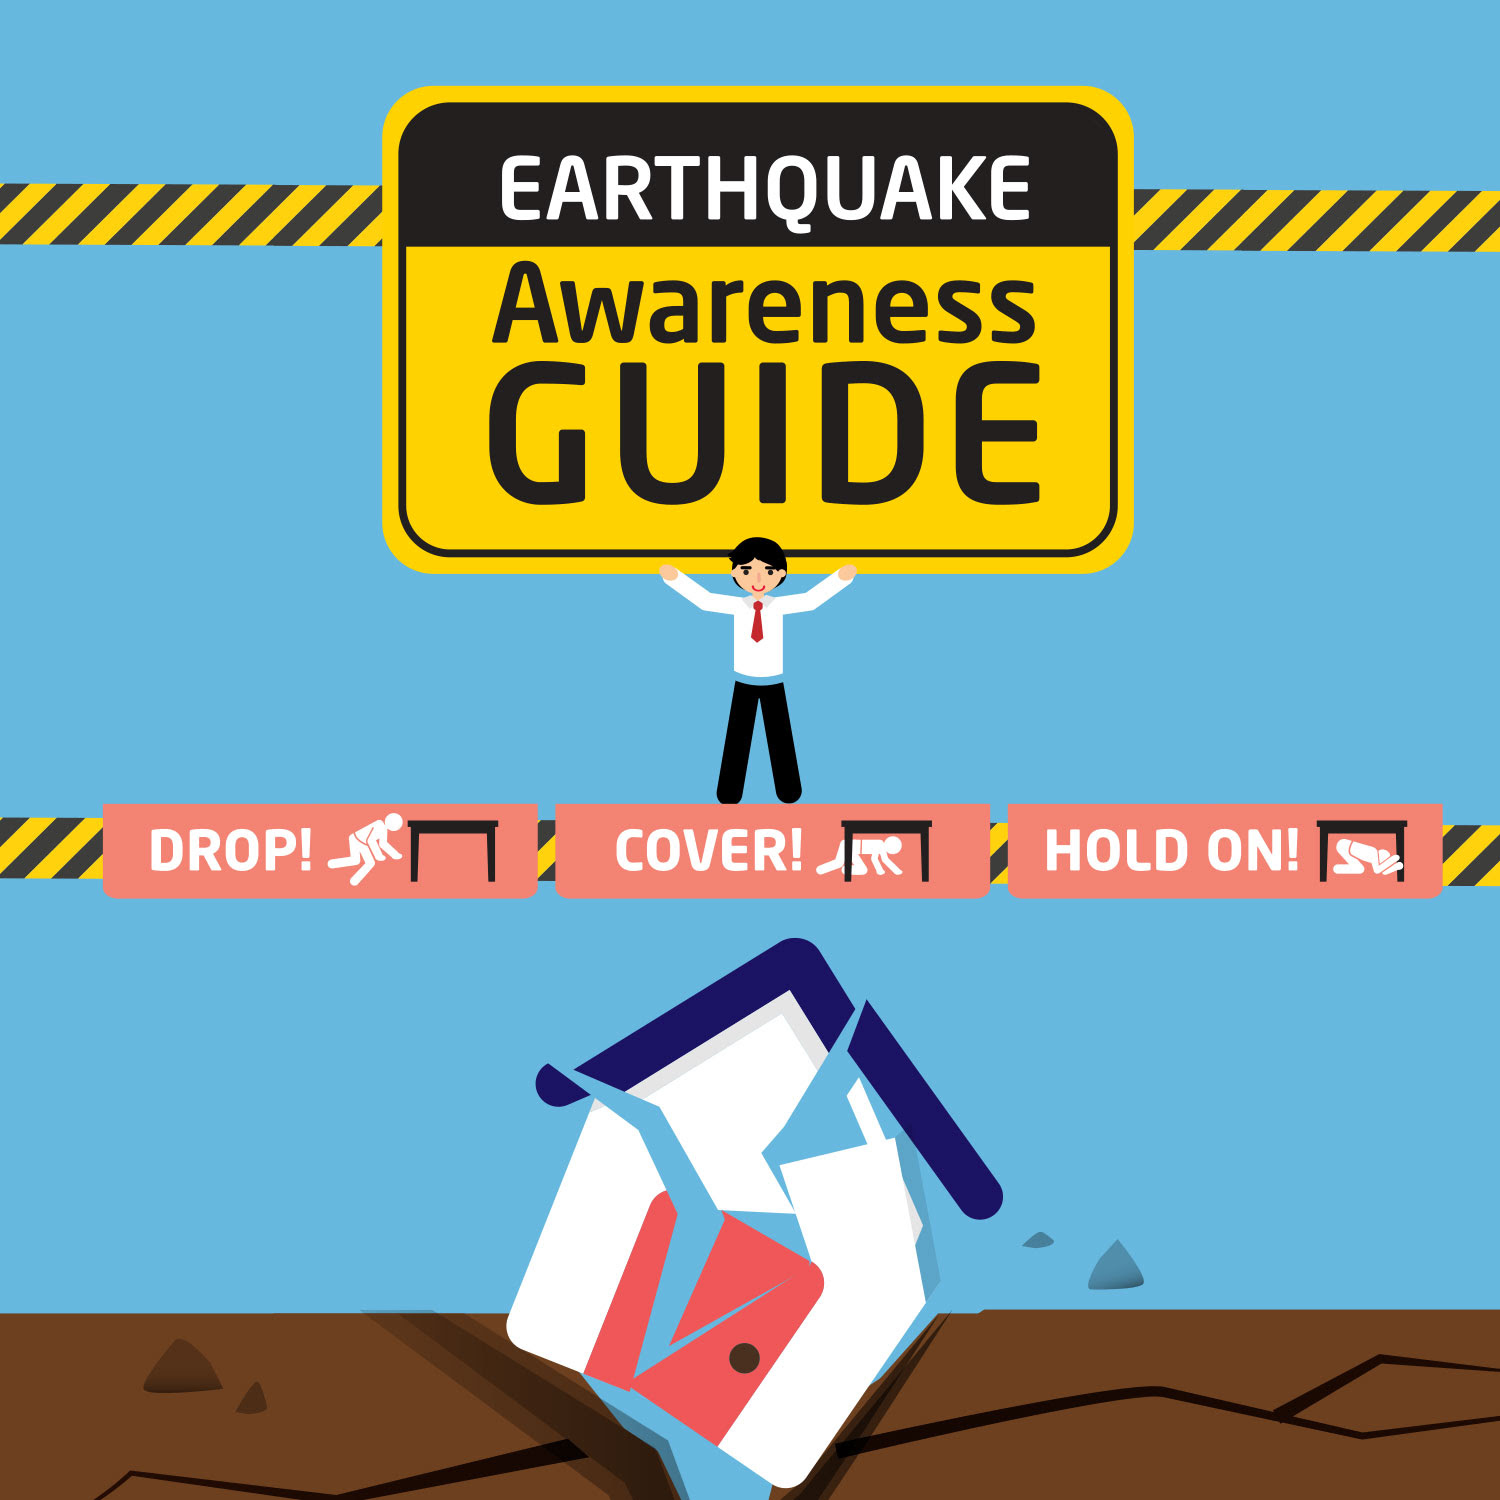 b"Drop, cover, hold on and other earthquake safety tips"